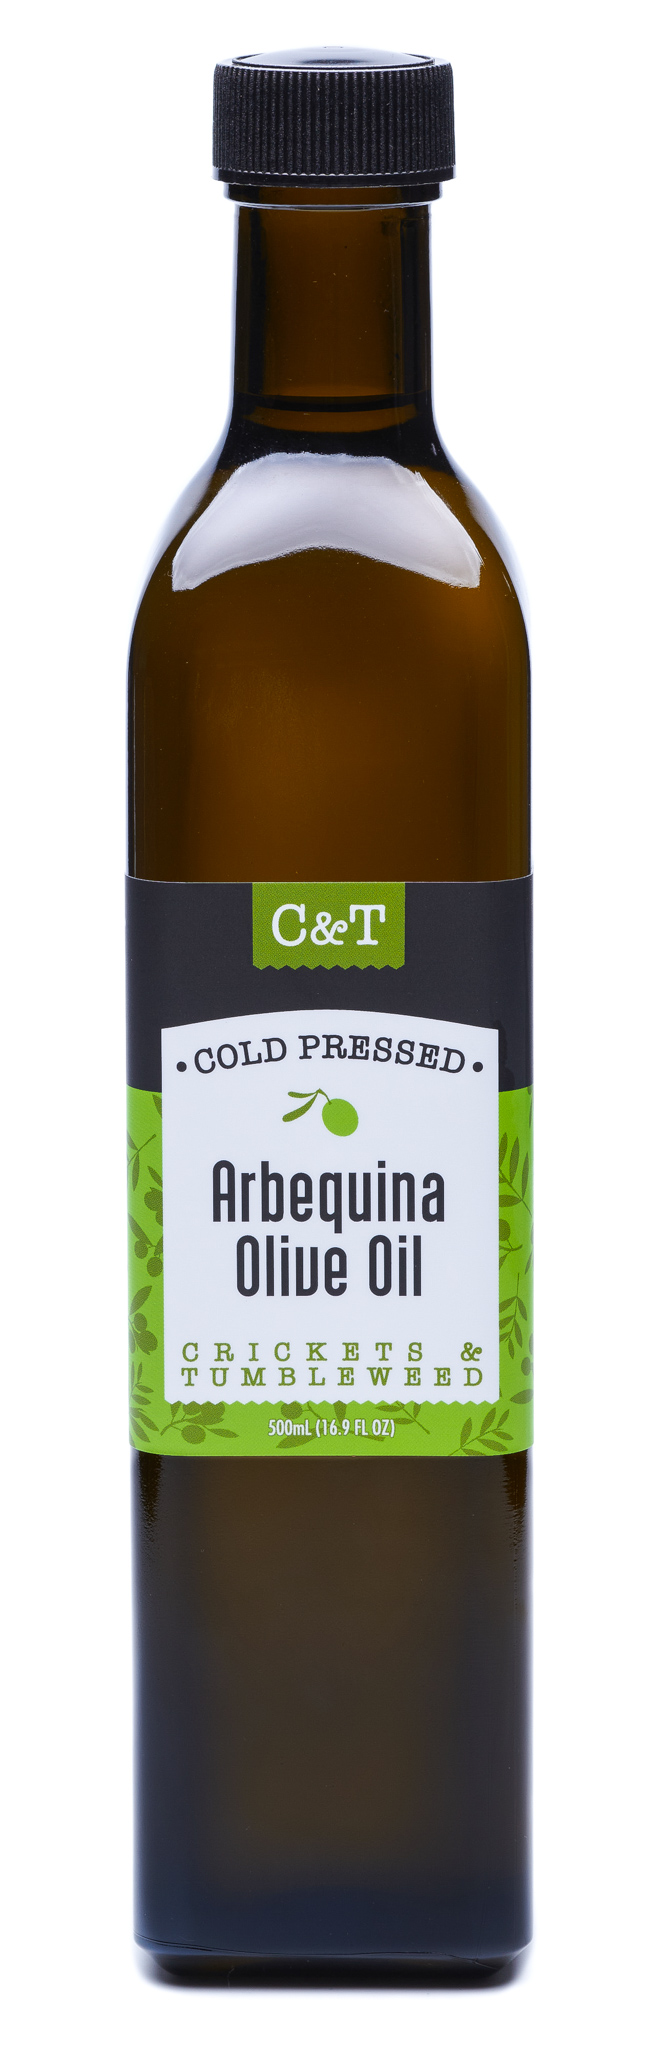 Product Image for C&T Olive Oil Arbequina